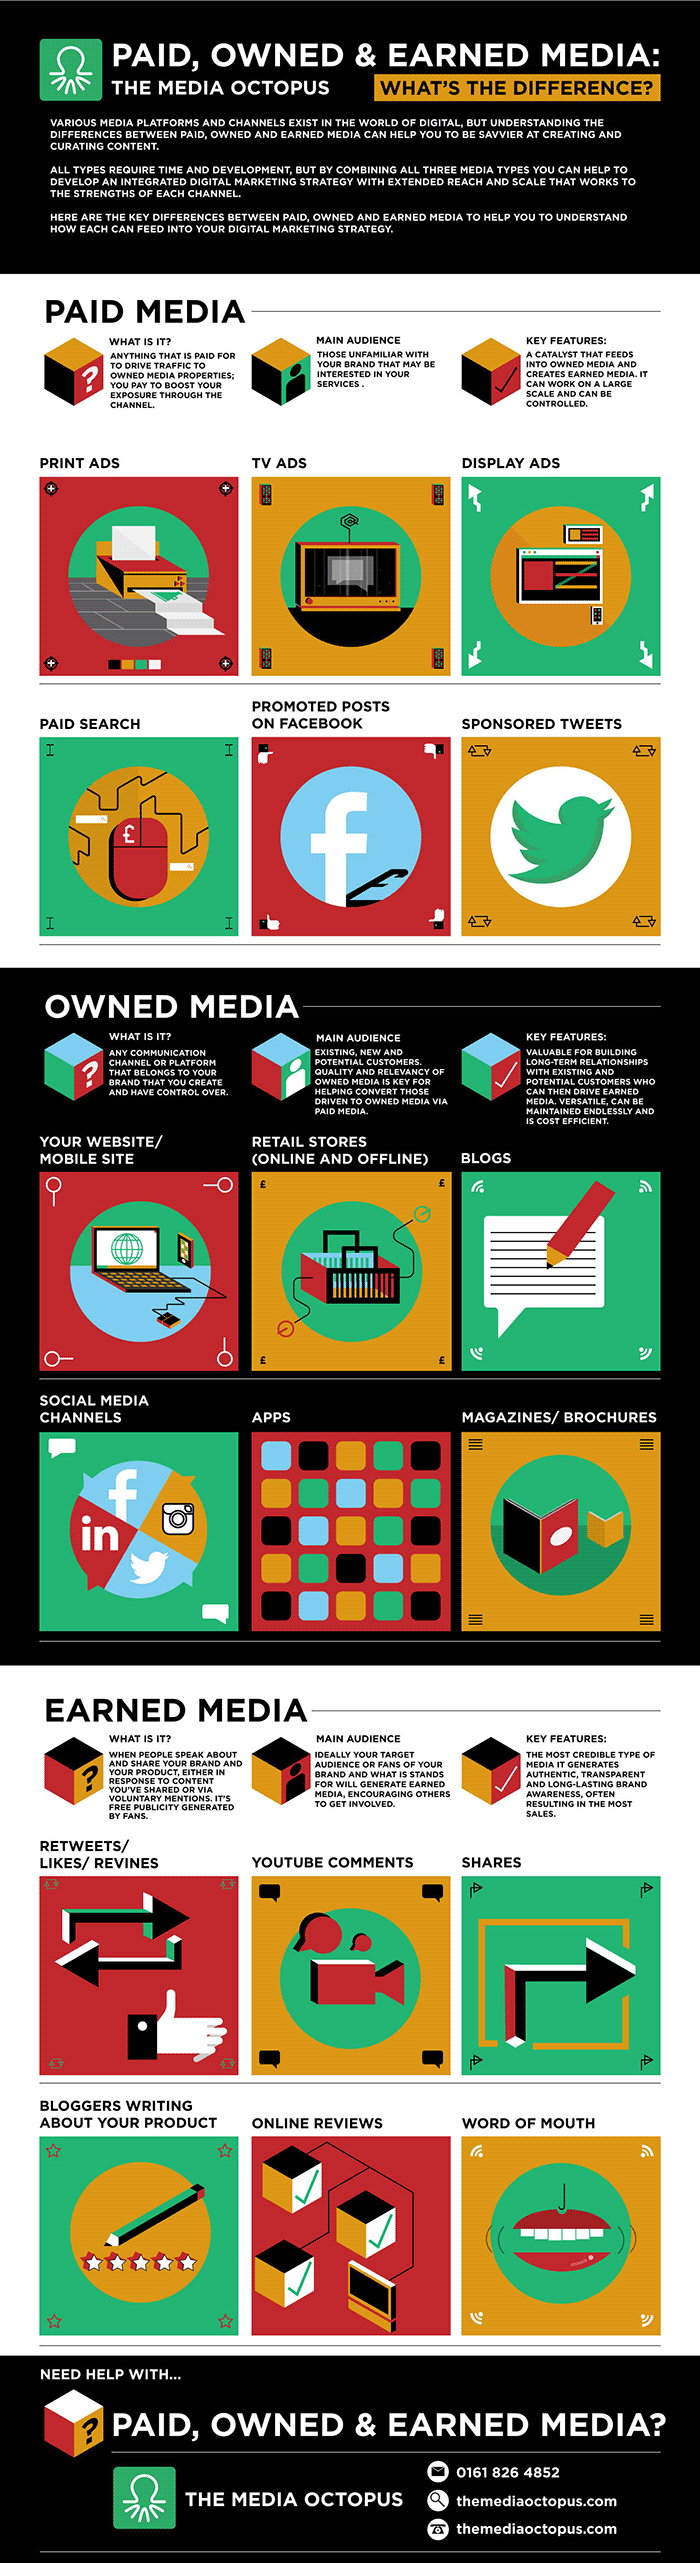 paid-owned-earn-media